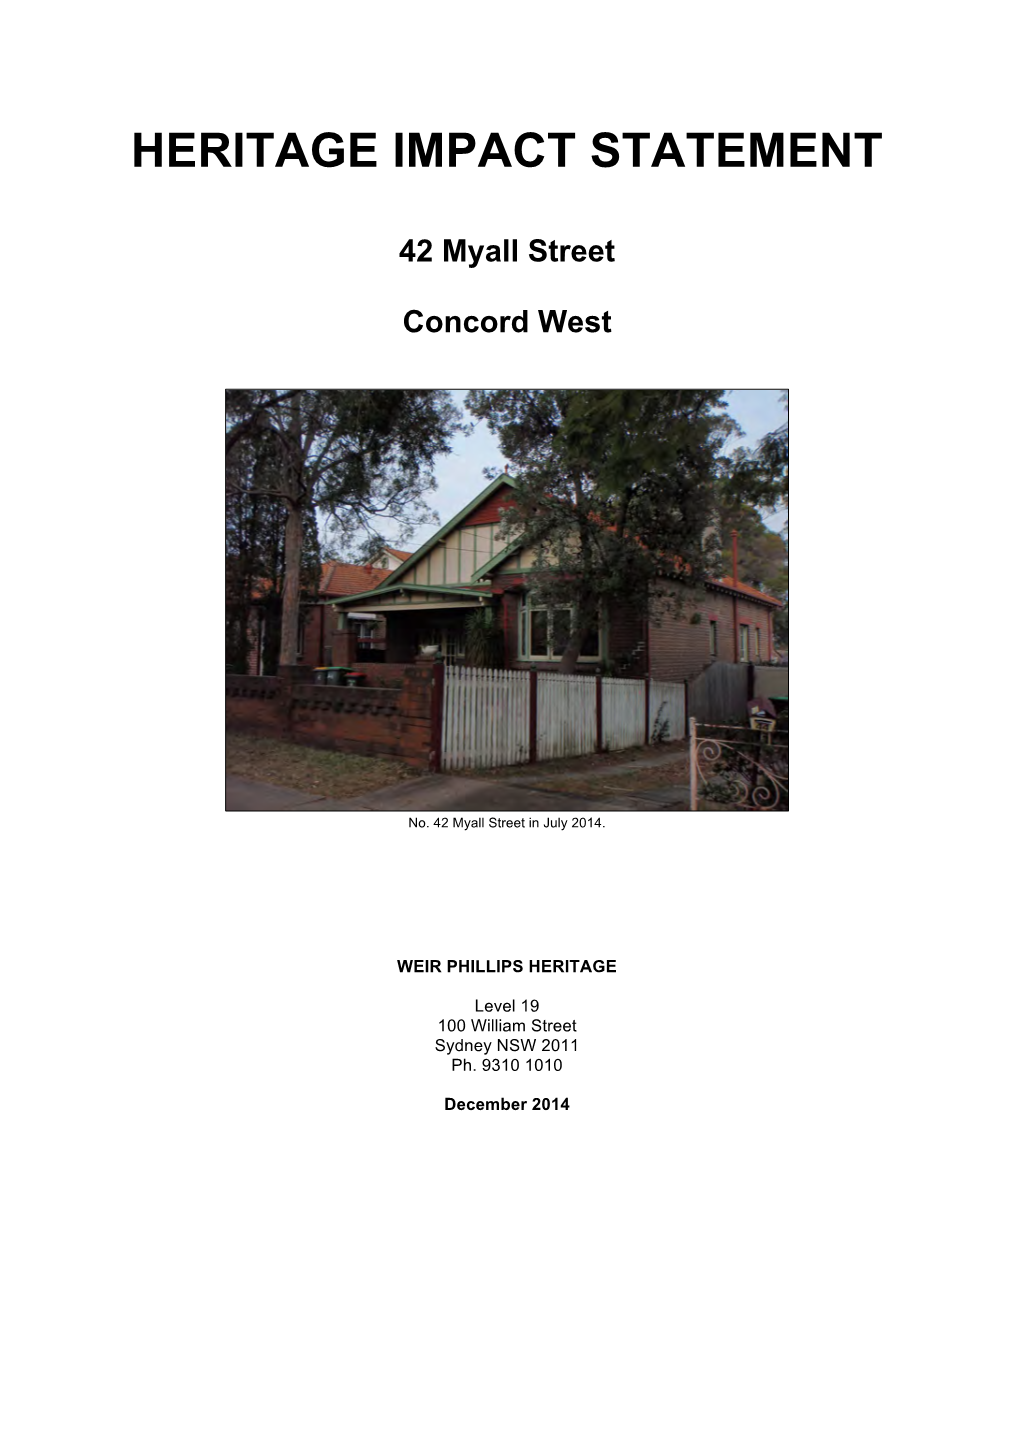 HERITAGE IMPACT STATEMENT 42 Myall Street Concord West